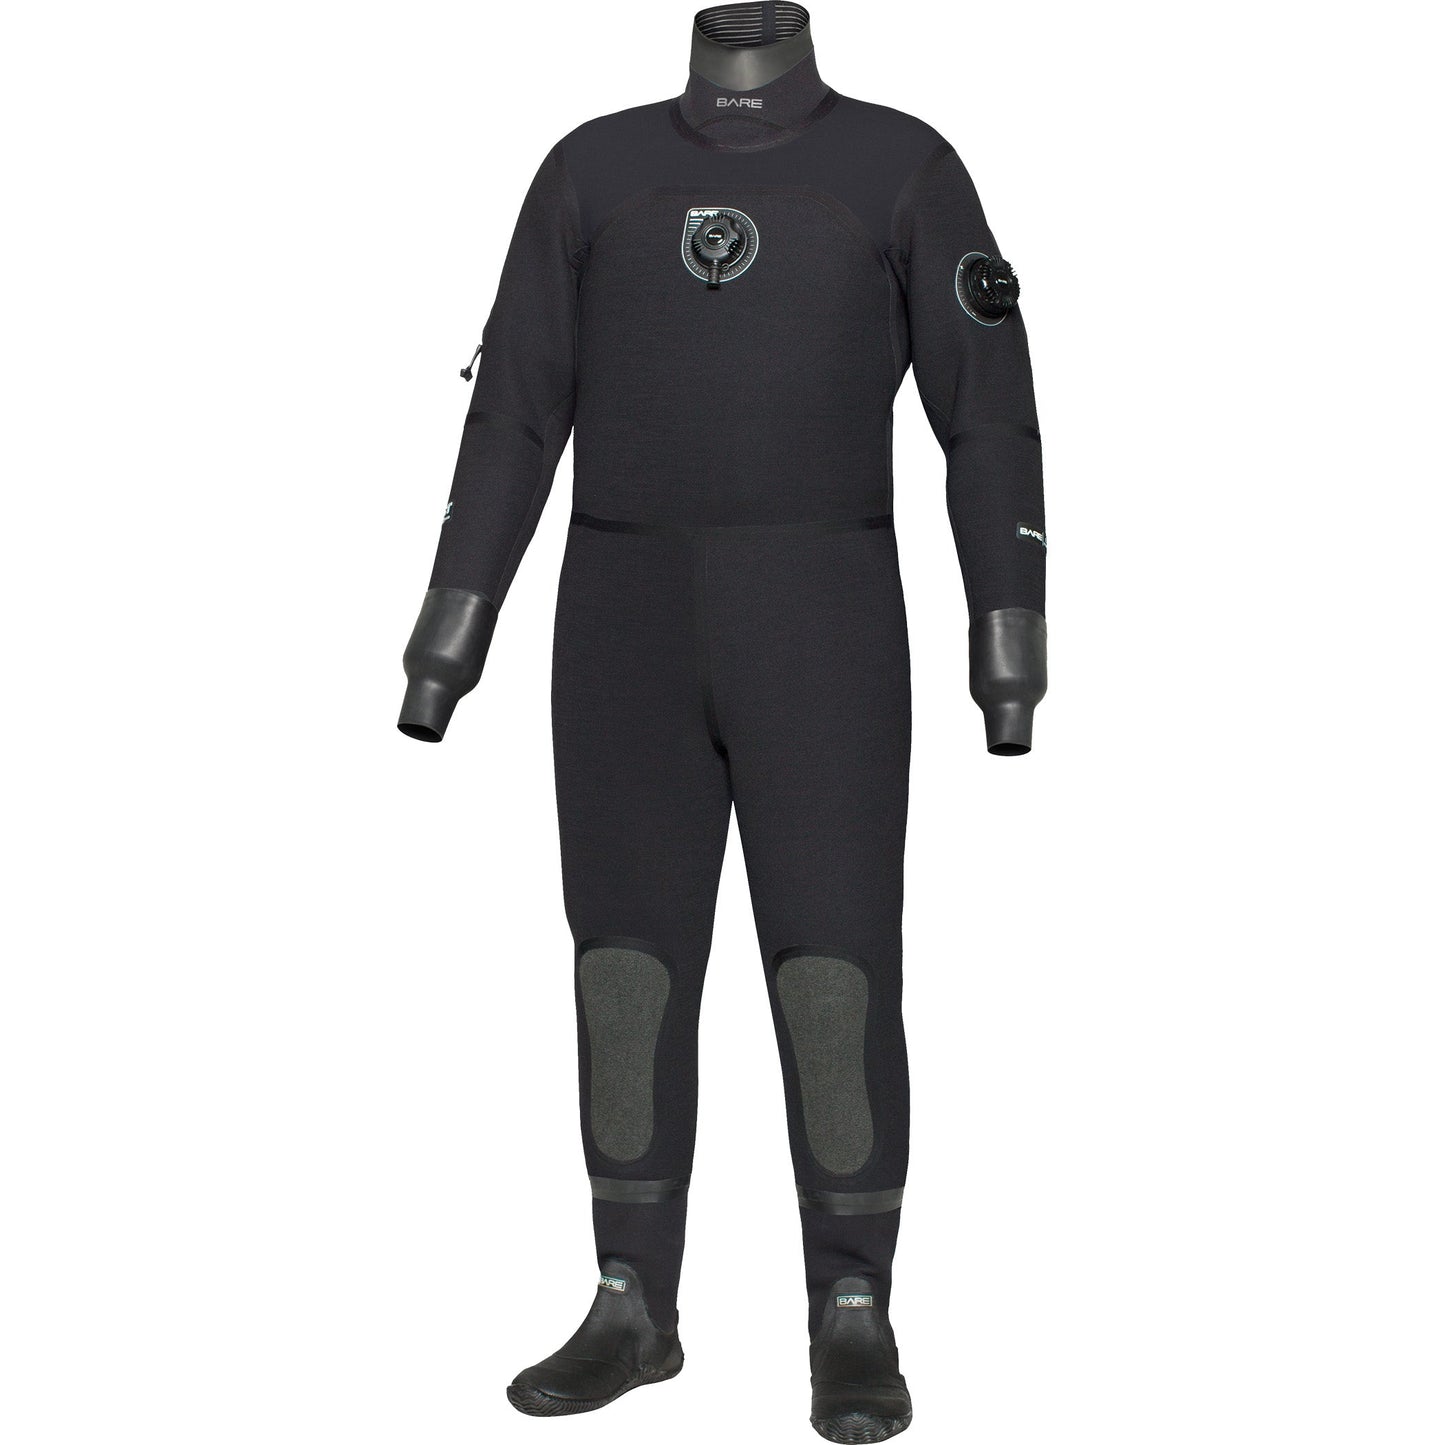 ONLY D6 HD dry suit